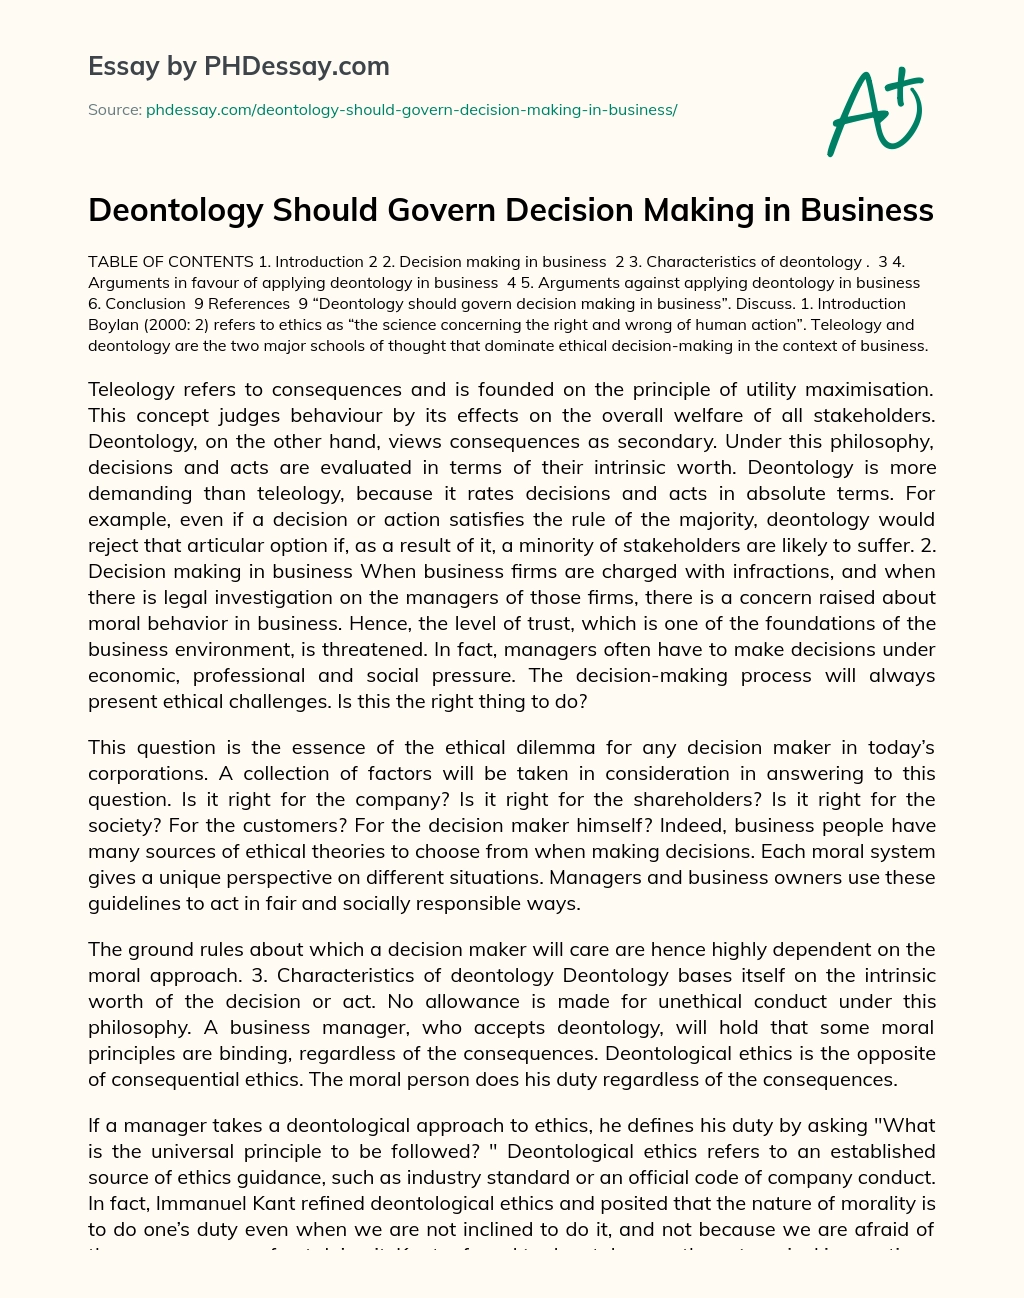 Deontology Should Govern Decision Making in Business essay